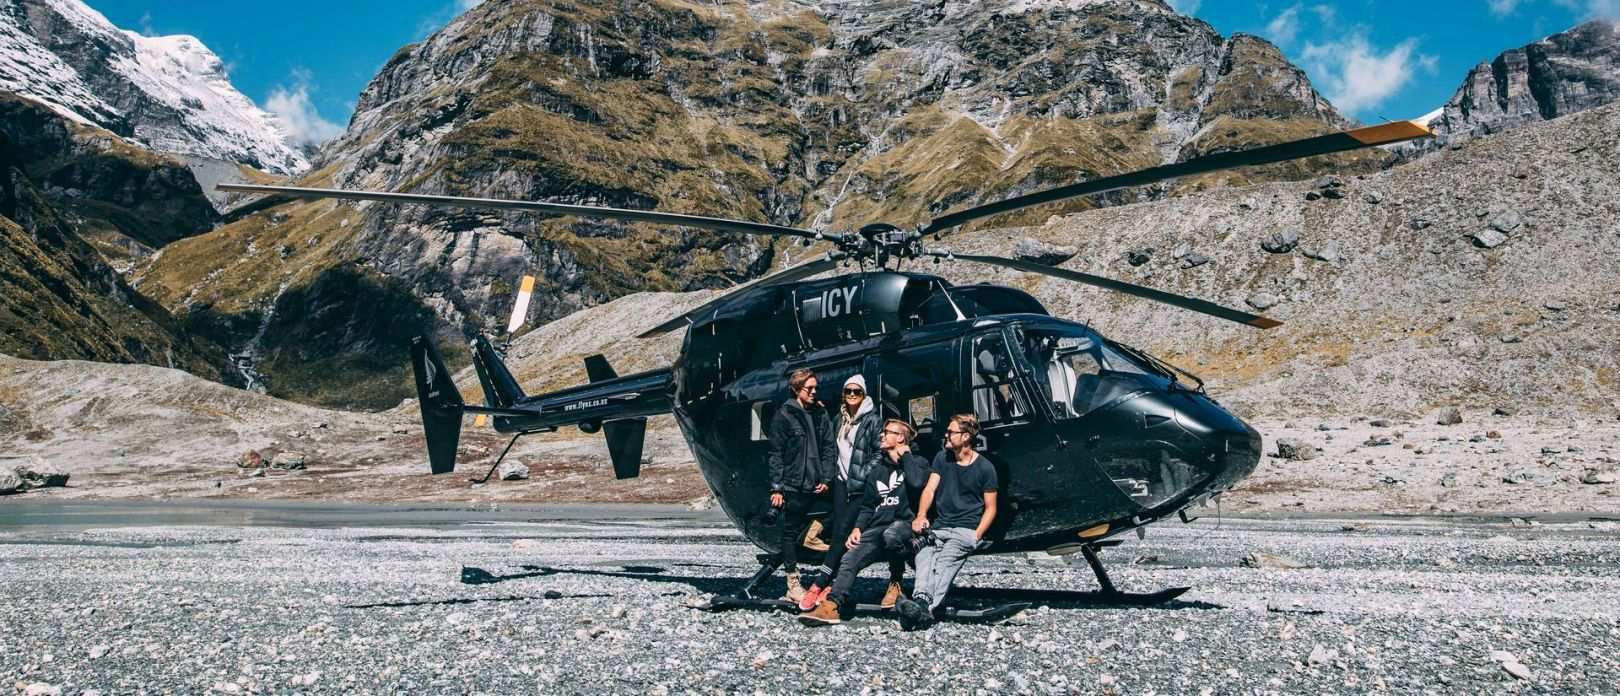 A group of people smiling, perched on the edge of a stationary helicopter